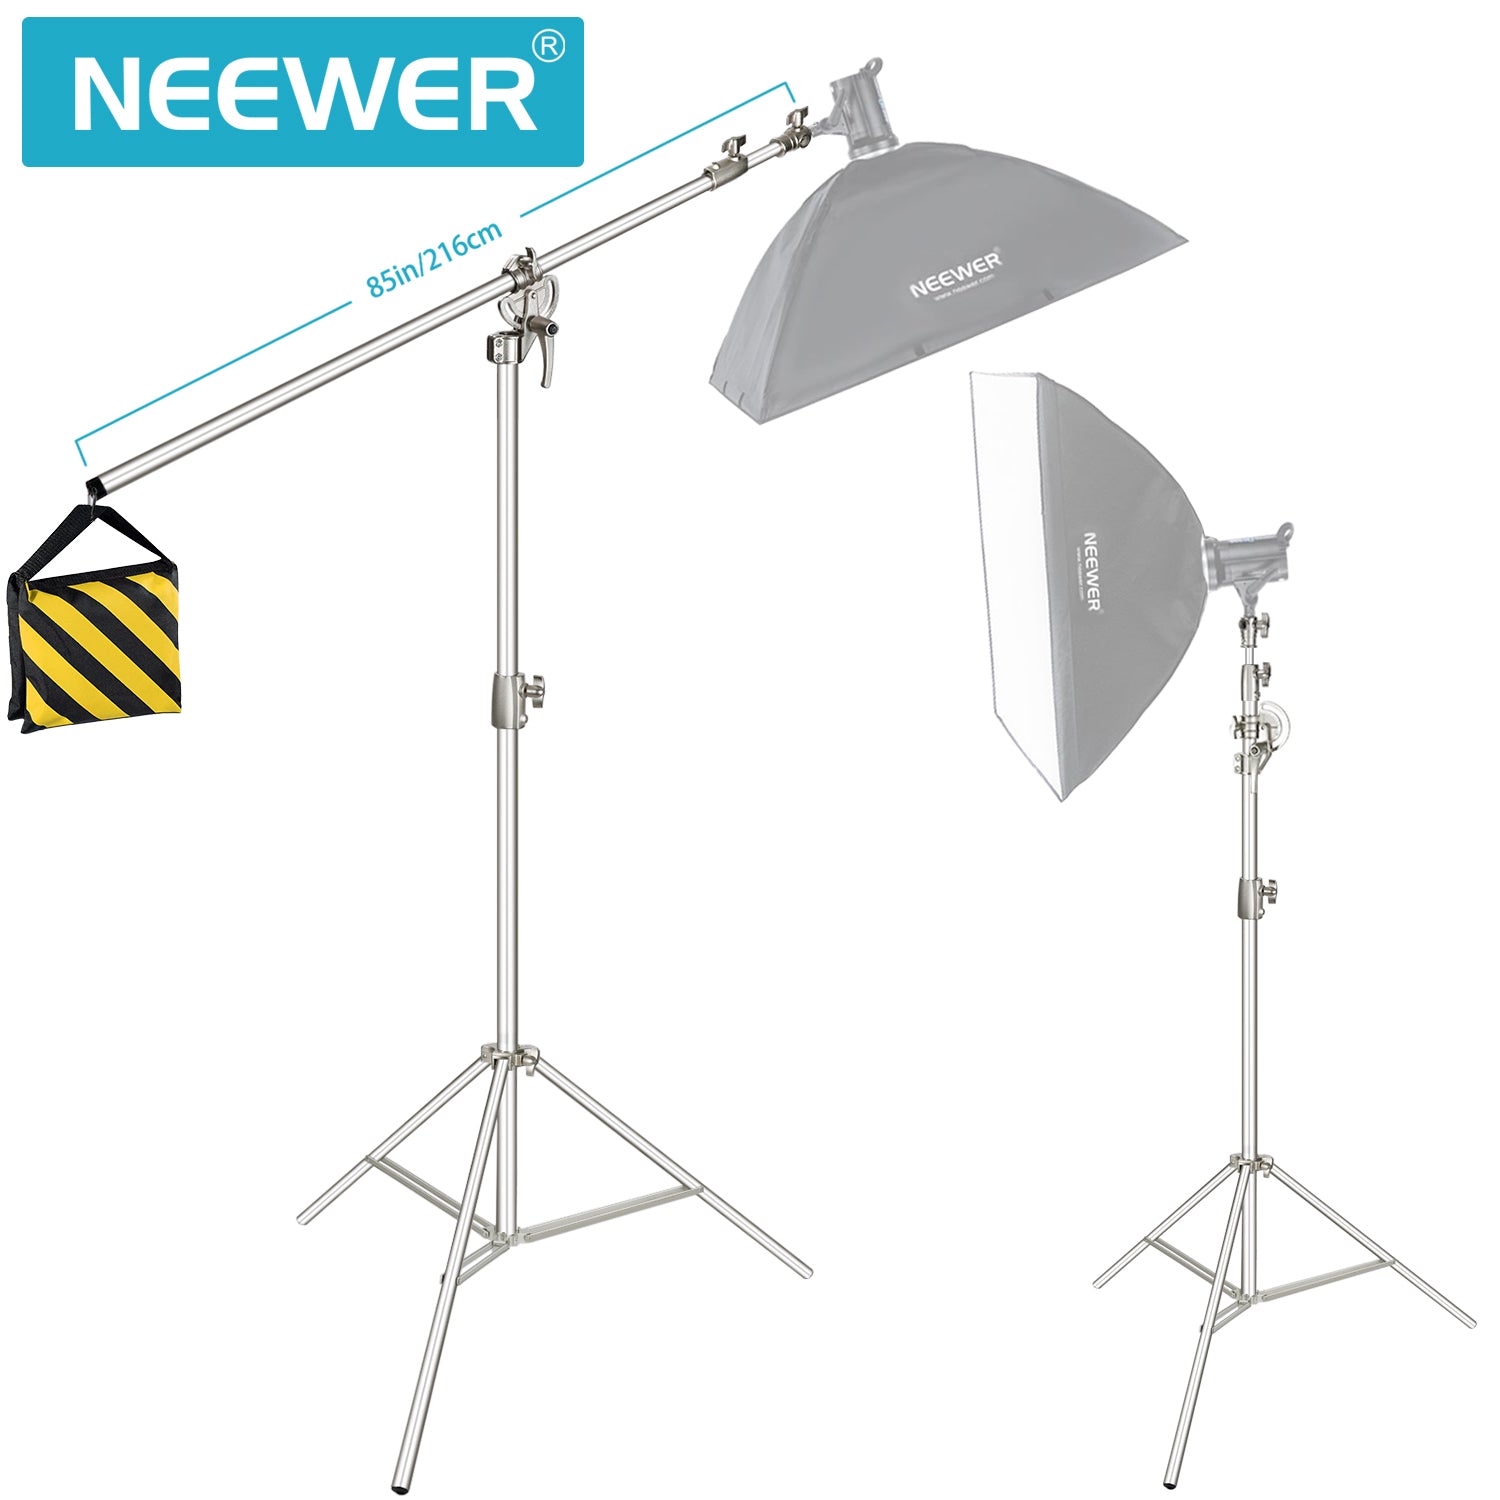 Neewer Bi-Color Video LED 2-Light Kit with Stands 66600536 B&H